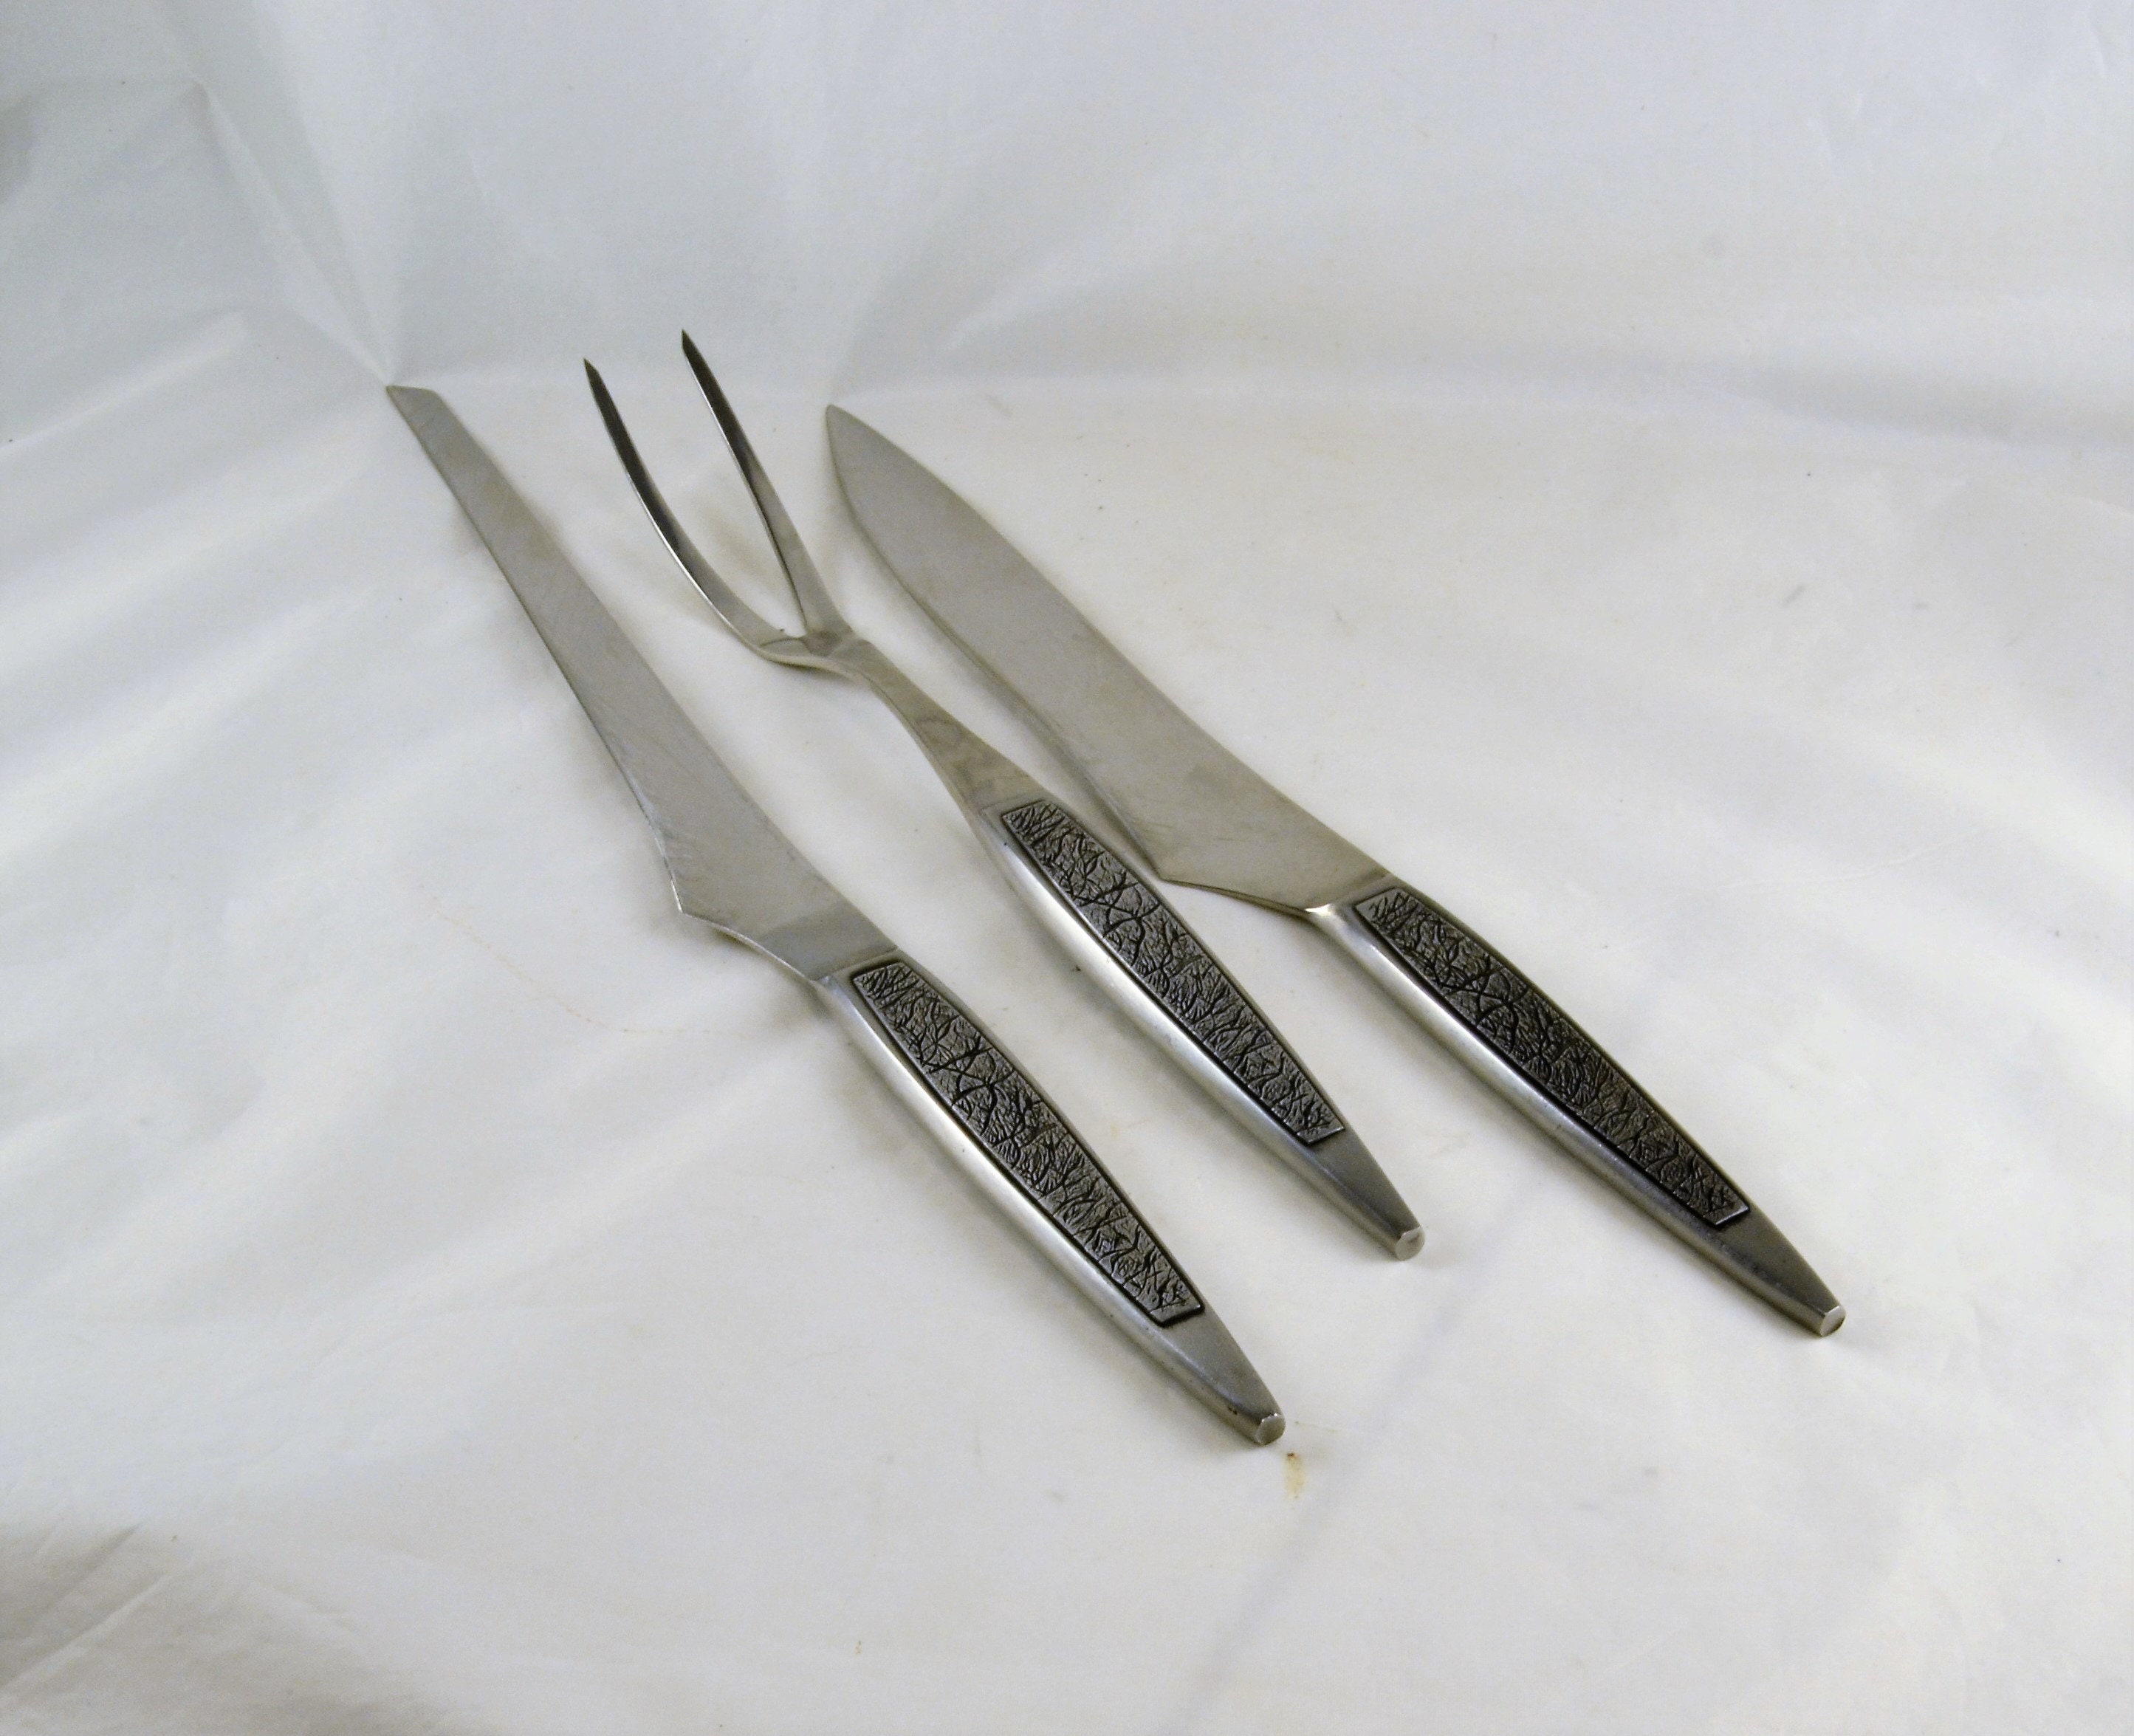 Sold at Auction: Silver Tear Silverware, Steak Knives and more